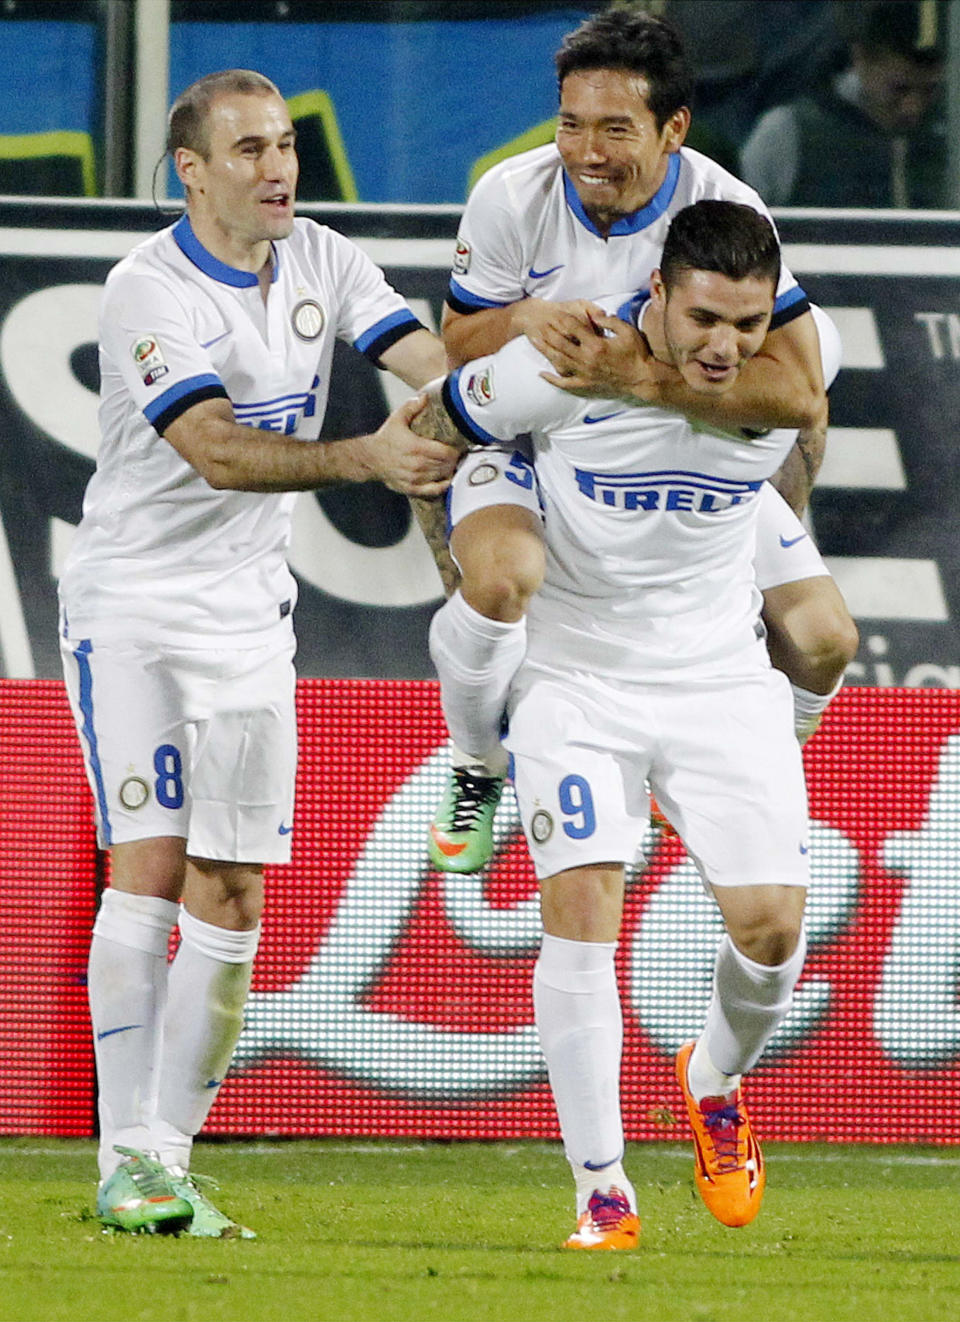 Inter Milan's Mauri Icardi, right, celebrates with teammates Rodrigo Palacio, left, and Yuto Nagatomo, on his back, after scoring during a Serie A soccer match between Fiorentina and Inter Milan, at the Artemio Franchi stadium in Florence, Italy, Saturday, Feb. 15, 2014. (AP Photo/Fabrizio Giovannozzi)